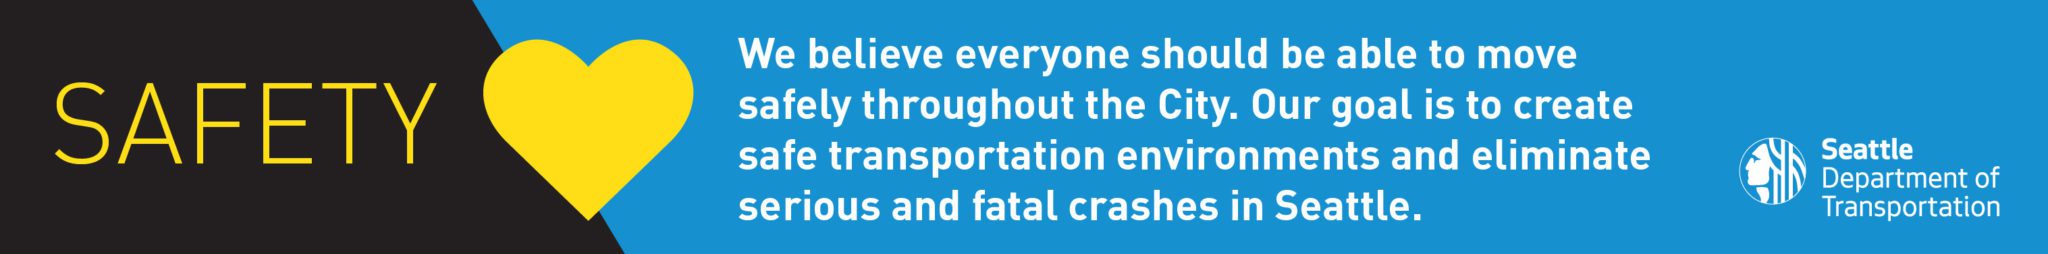 Safety: We believe everyone should be able to move safely throughout the City. Our goal is to create safe transportation environments and eliminate serious and fatal crashes in Seattle.